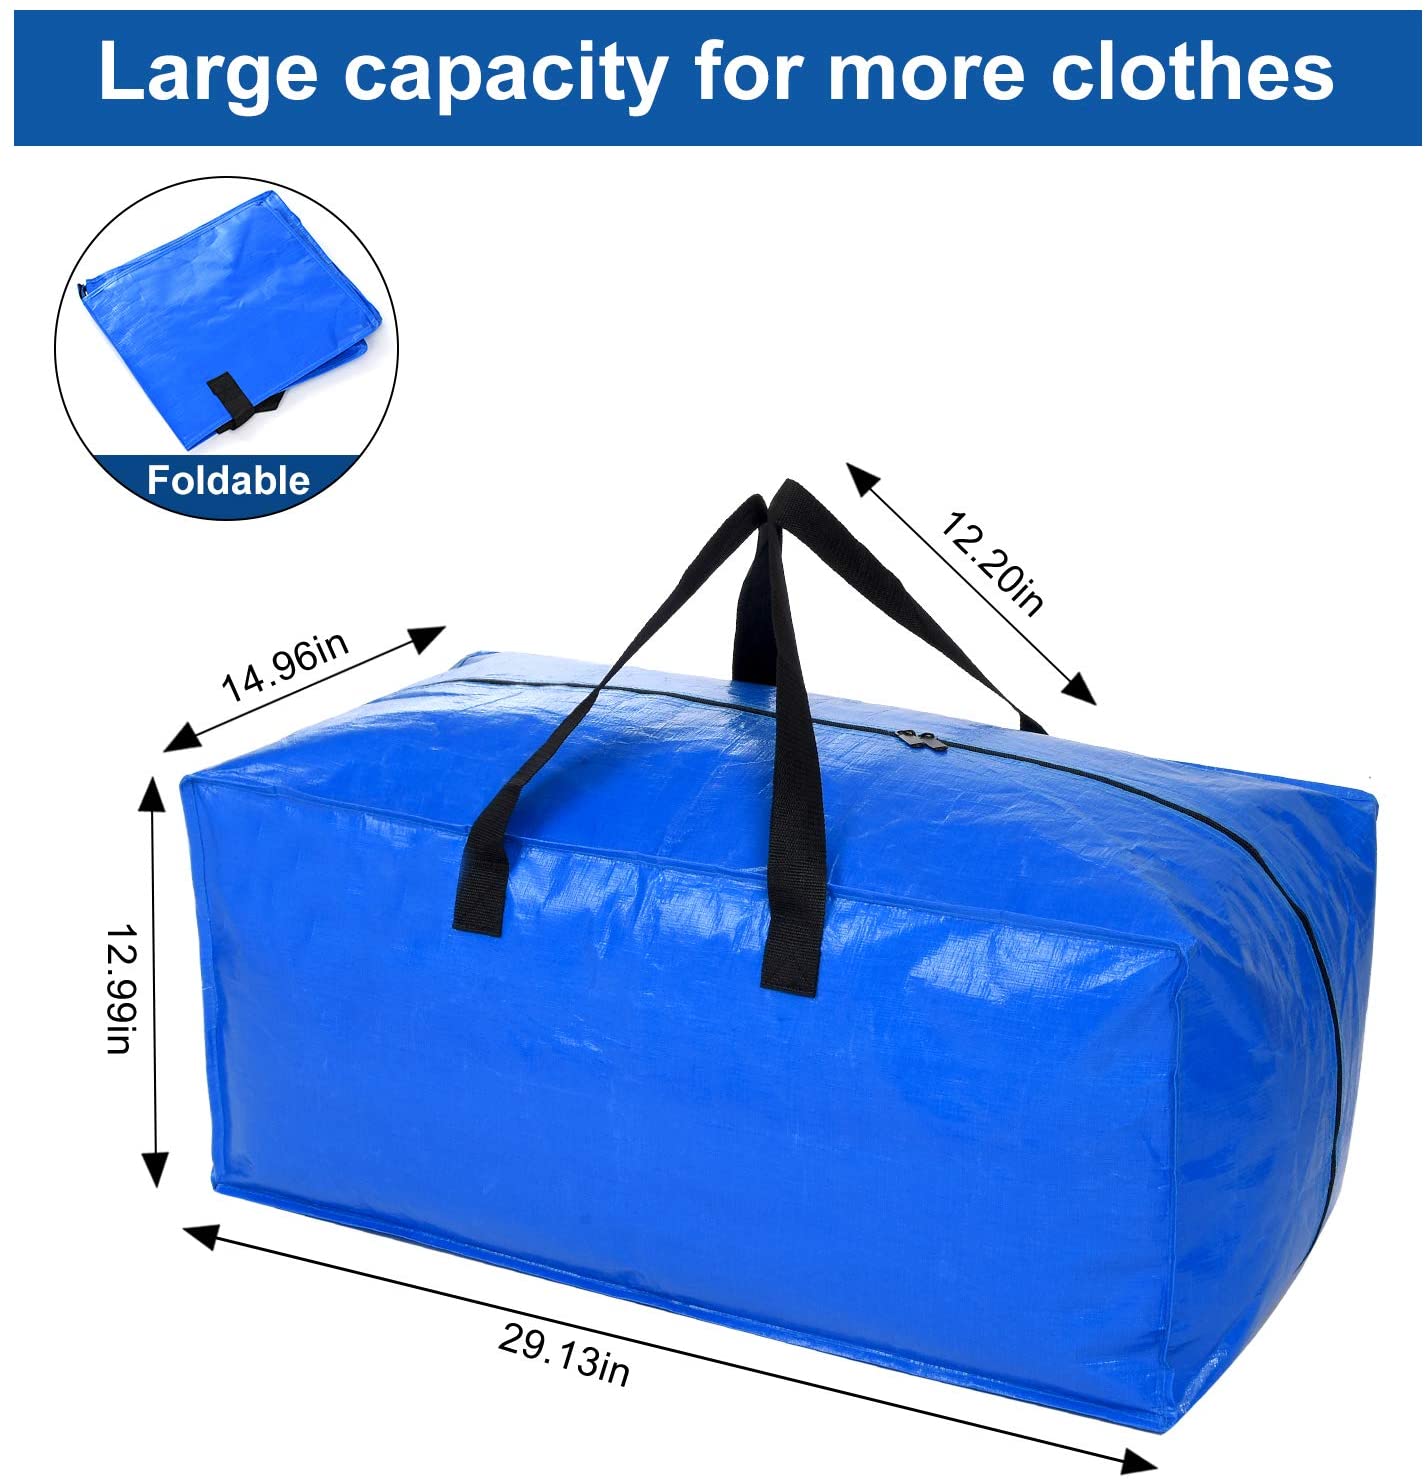 The Acnusik Moving Bags Are on Sale at